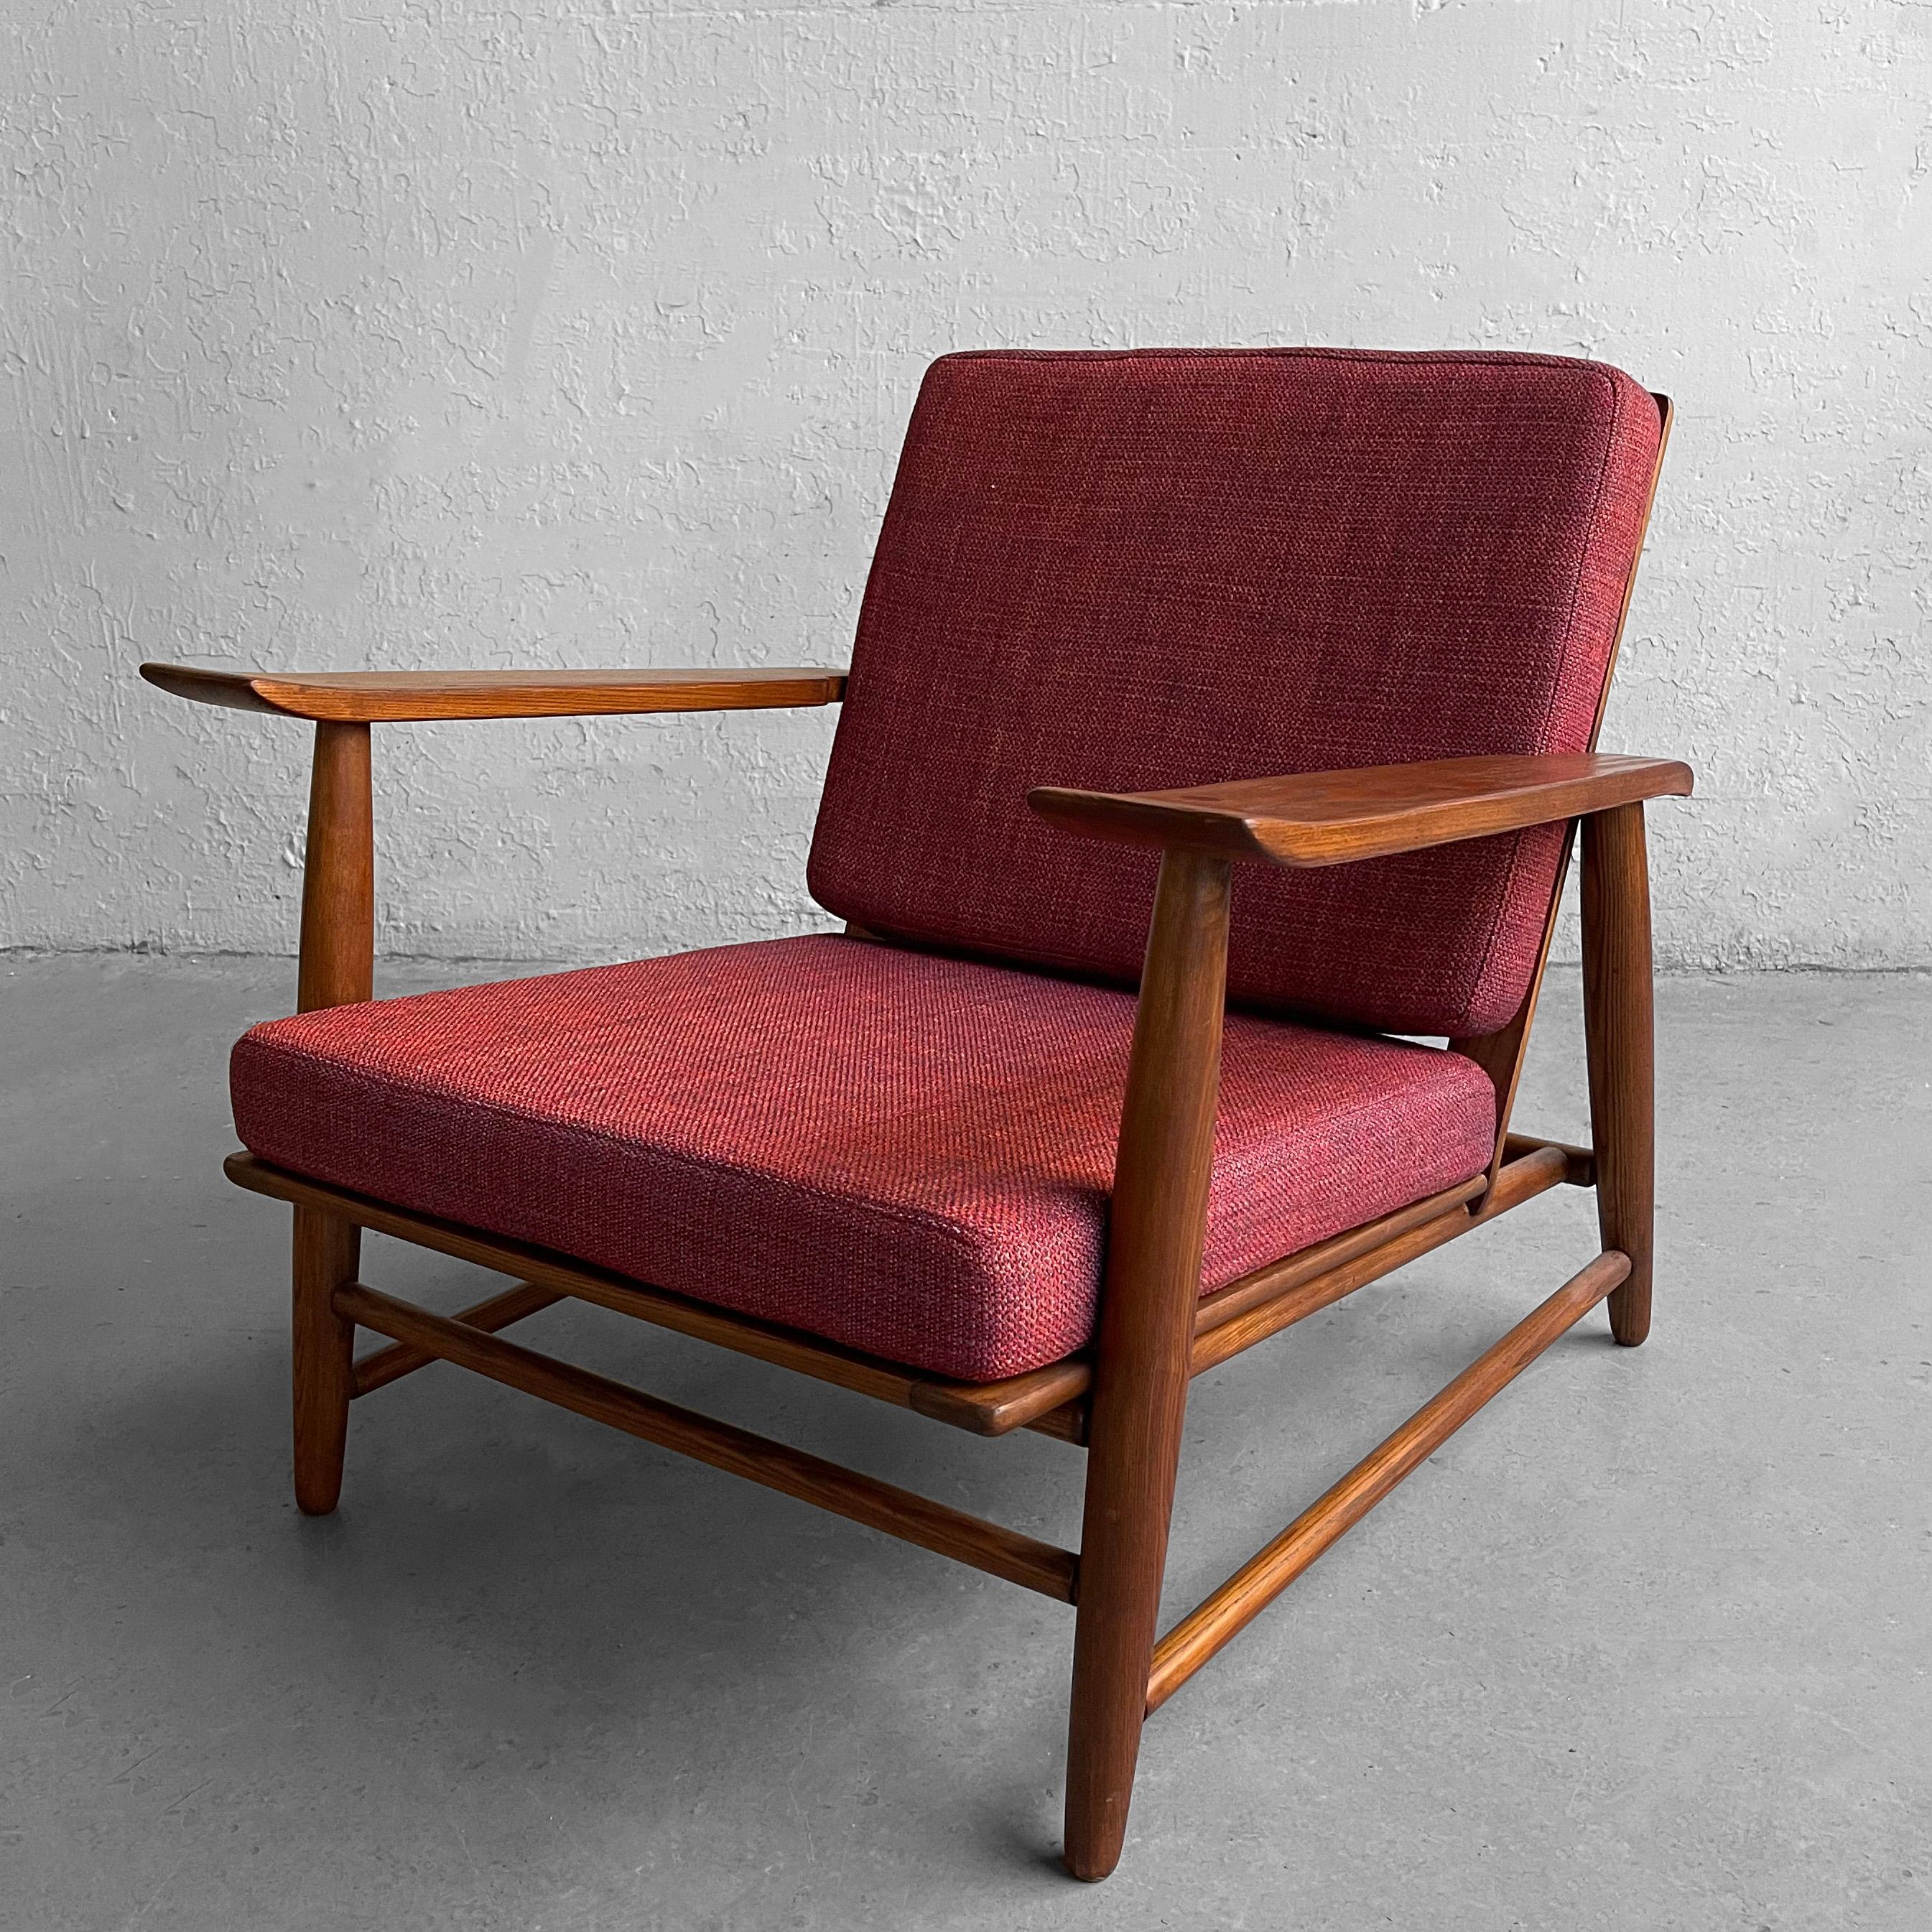 Handsome, Mid-Century Modern, lounge chair by Heywood Wakefield features a low-profile, oak frame with wide upturned arms. The cushions are newly upholstered in red tweed blend.